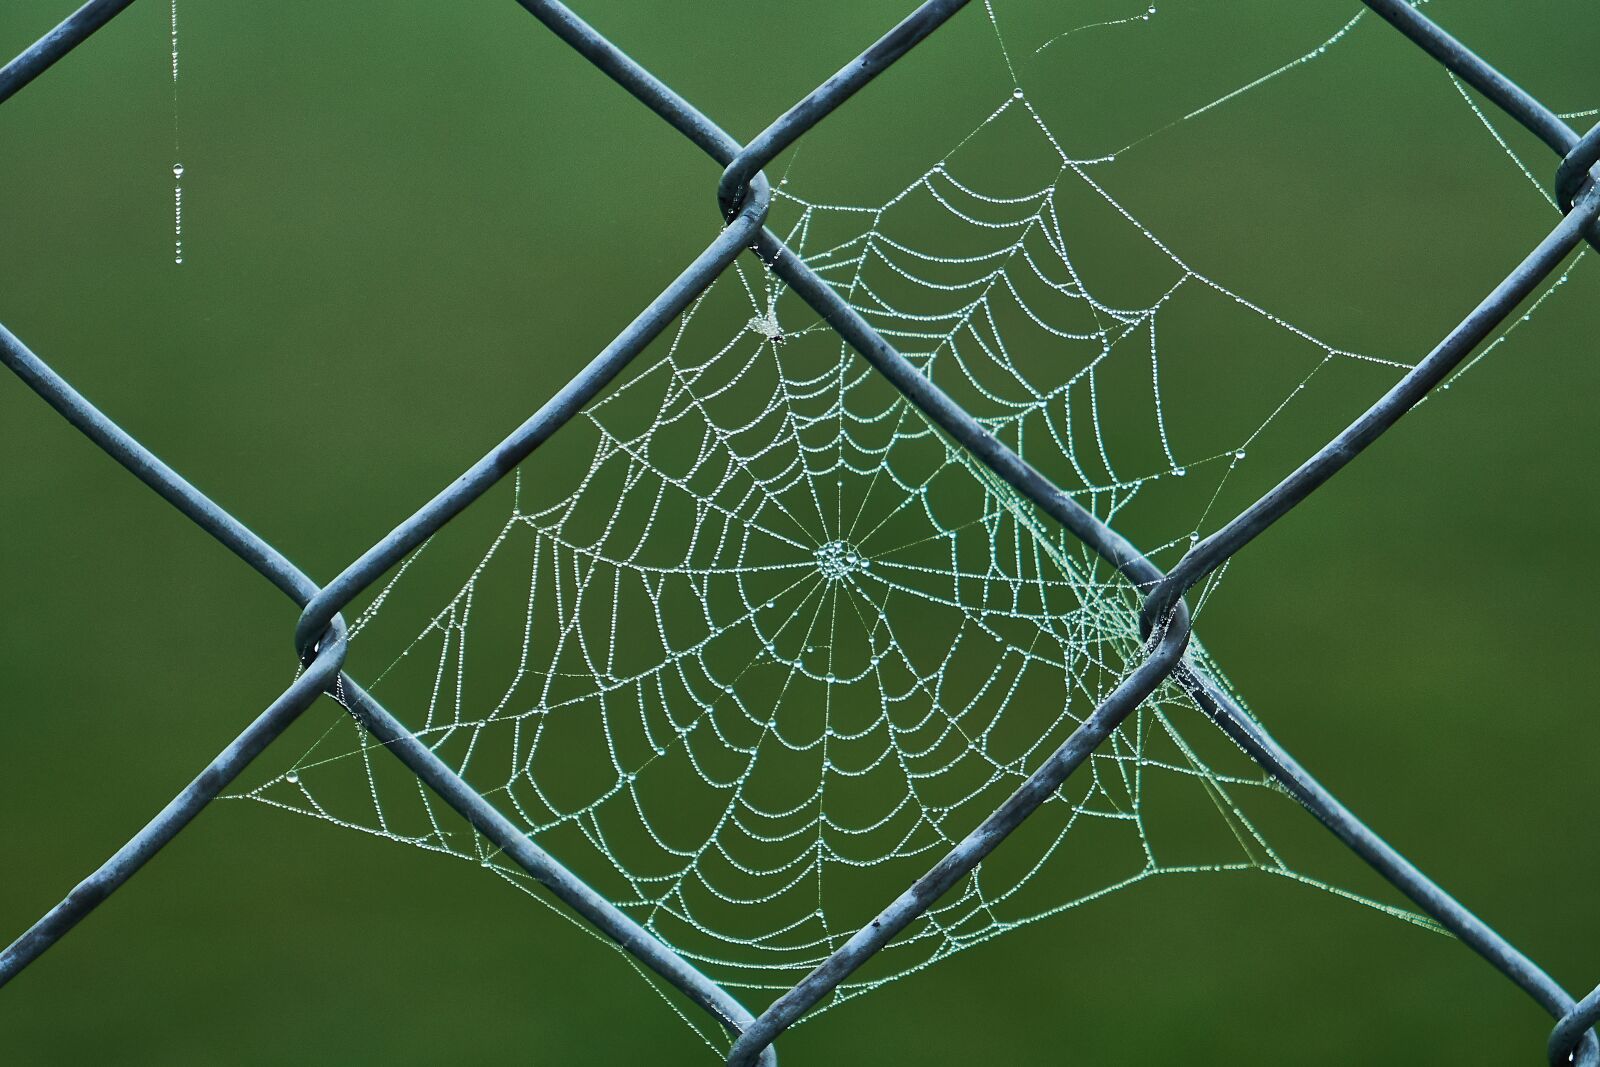 Sony a6300 sample photo. Cobweb, wire mesh fence photography